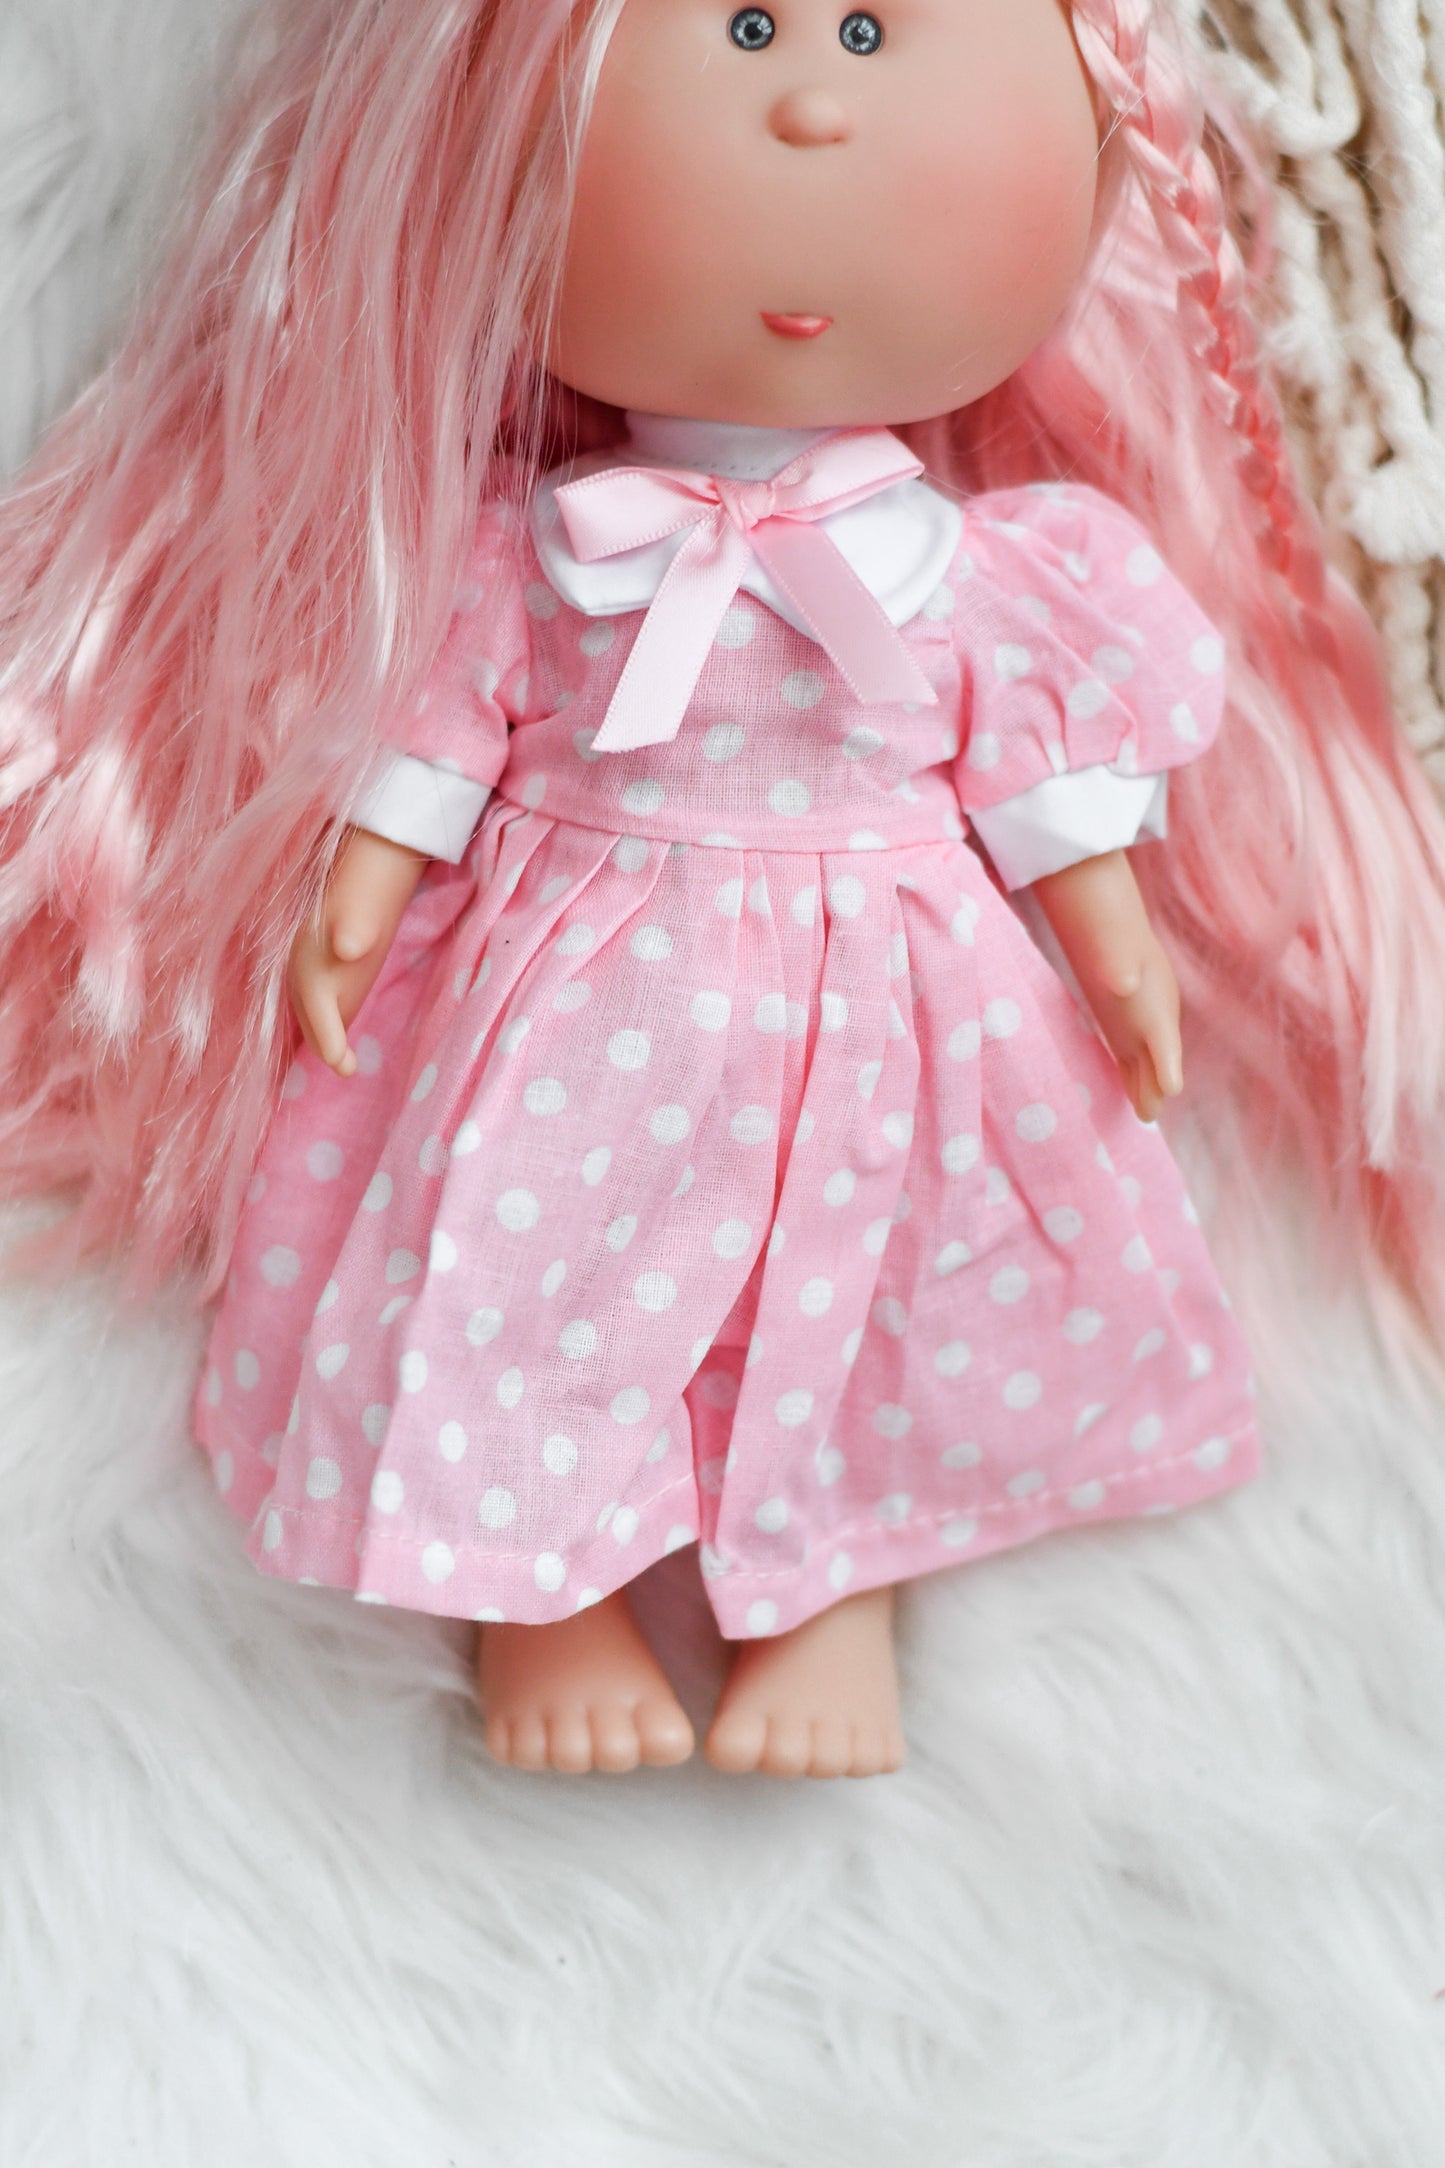 Minnie Mouse Inspired Dress - MIA DOLL